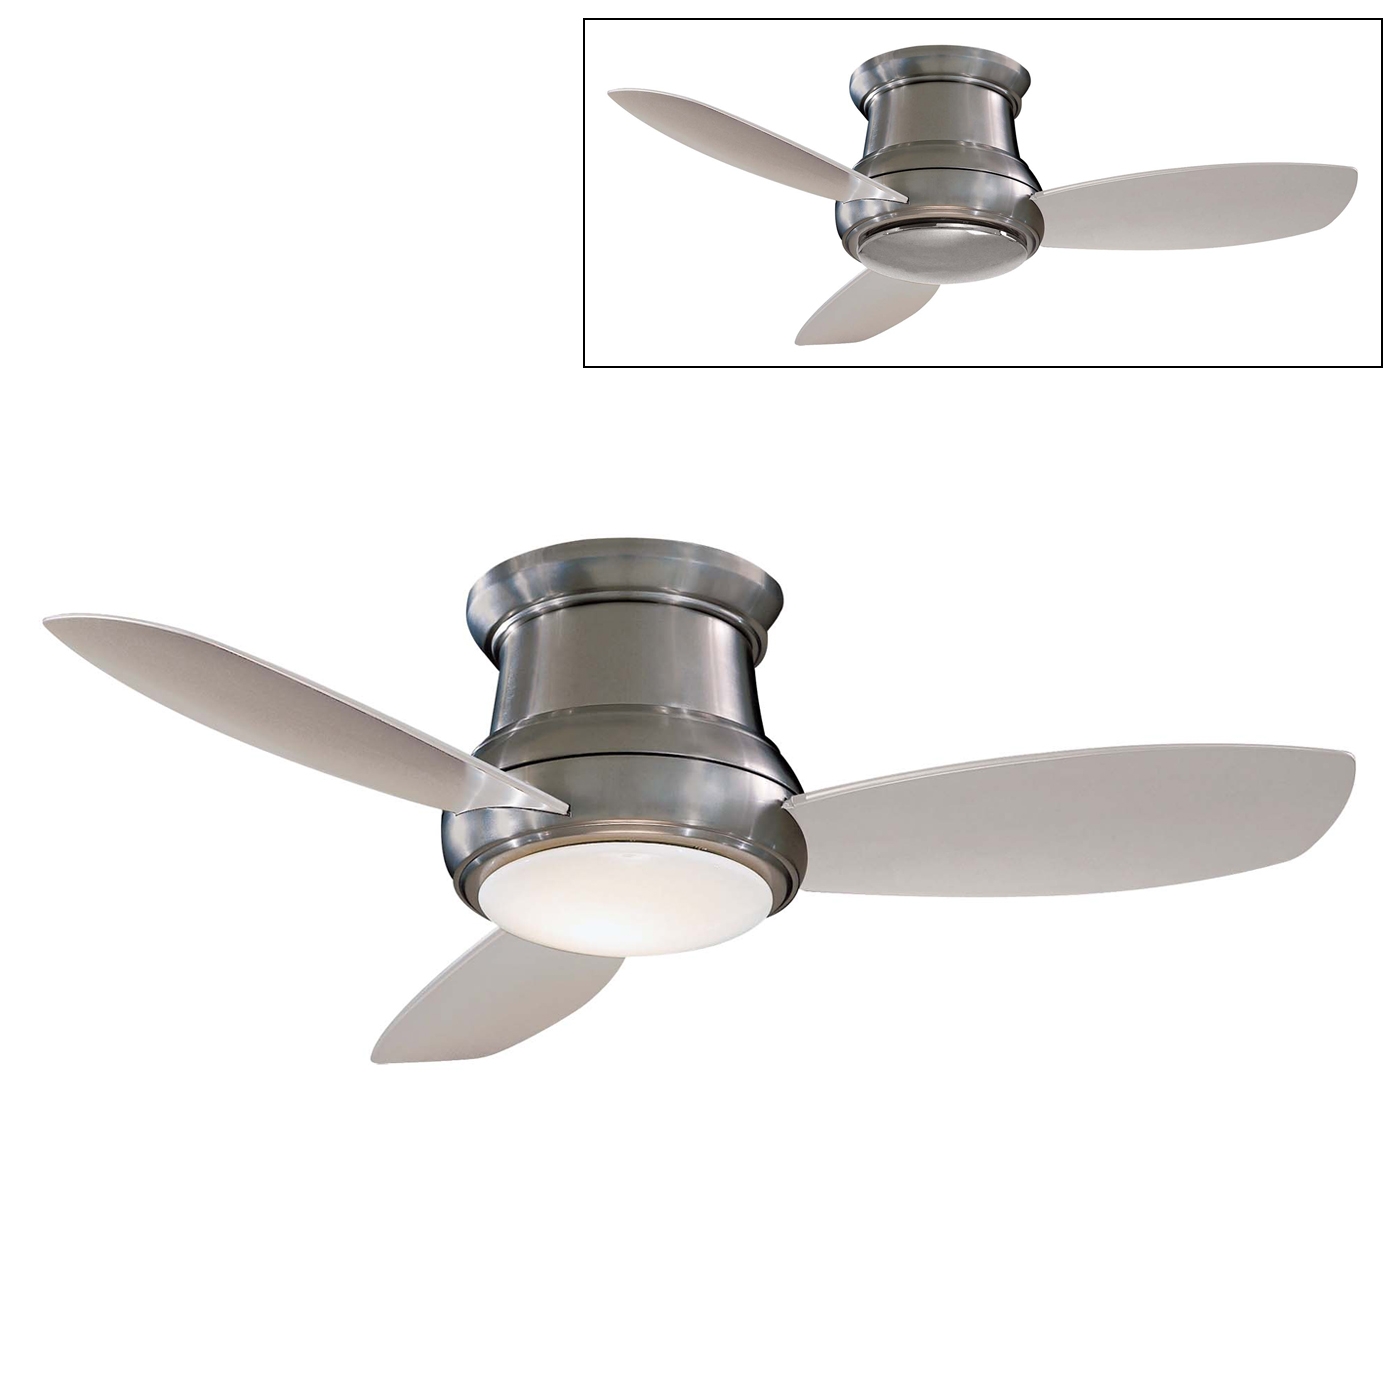 Small Ceiling Fans With Remote Control And Lightsmall ceiling fans with remote control and light decoration ideas